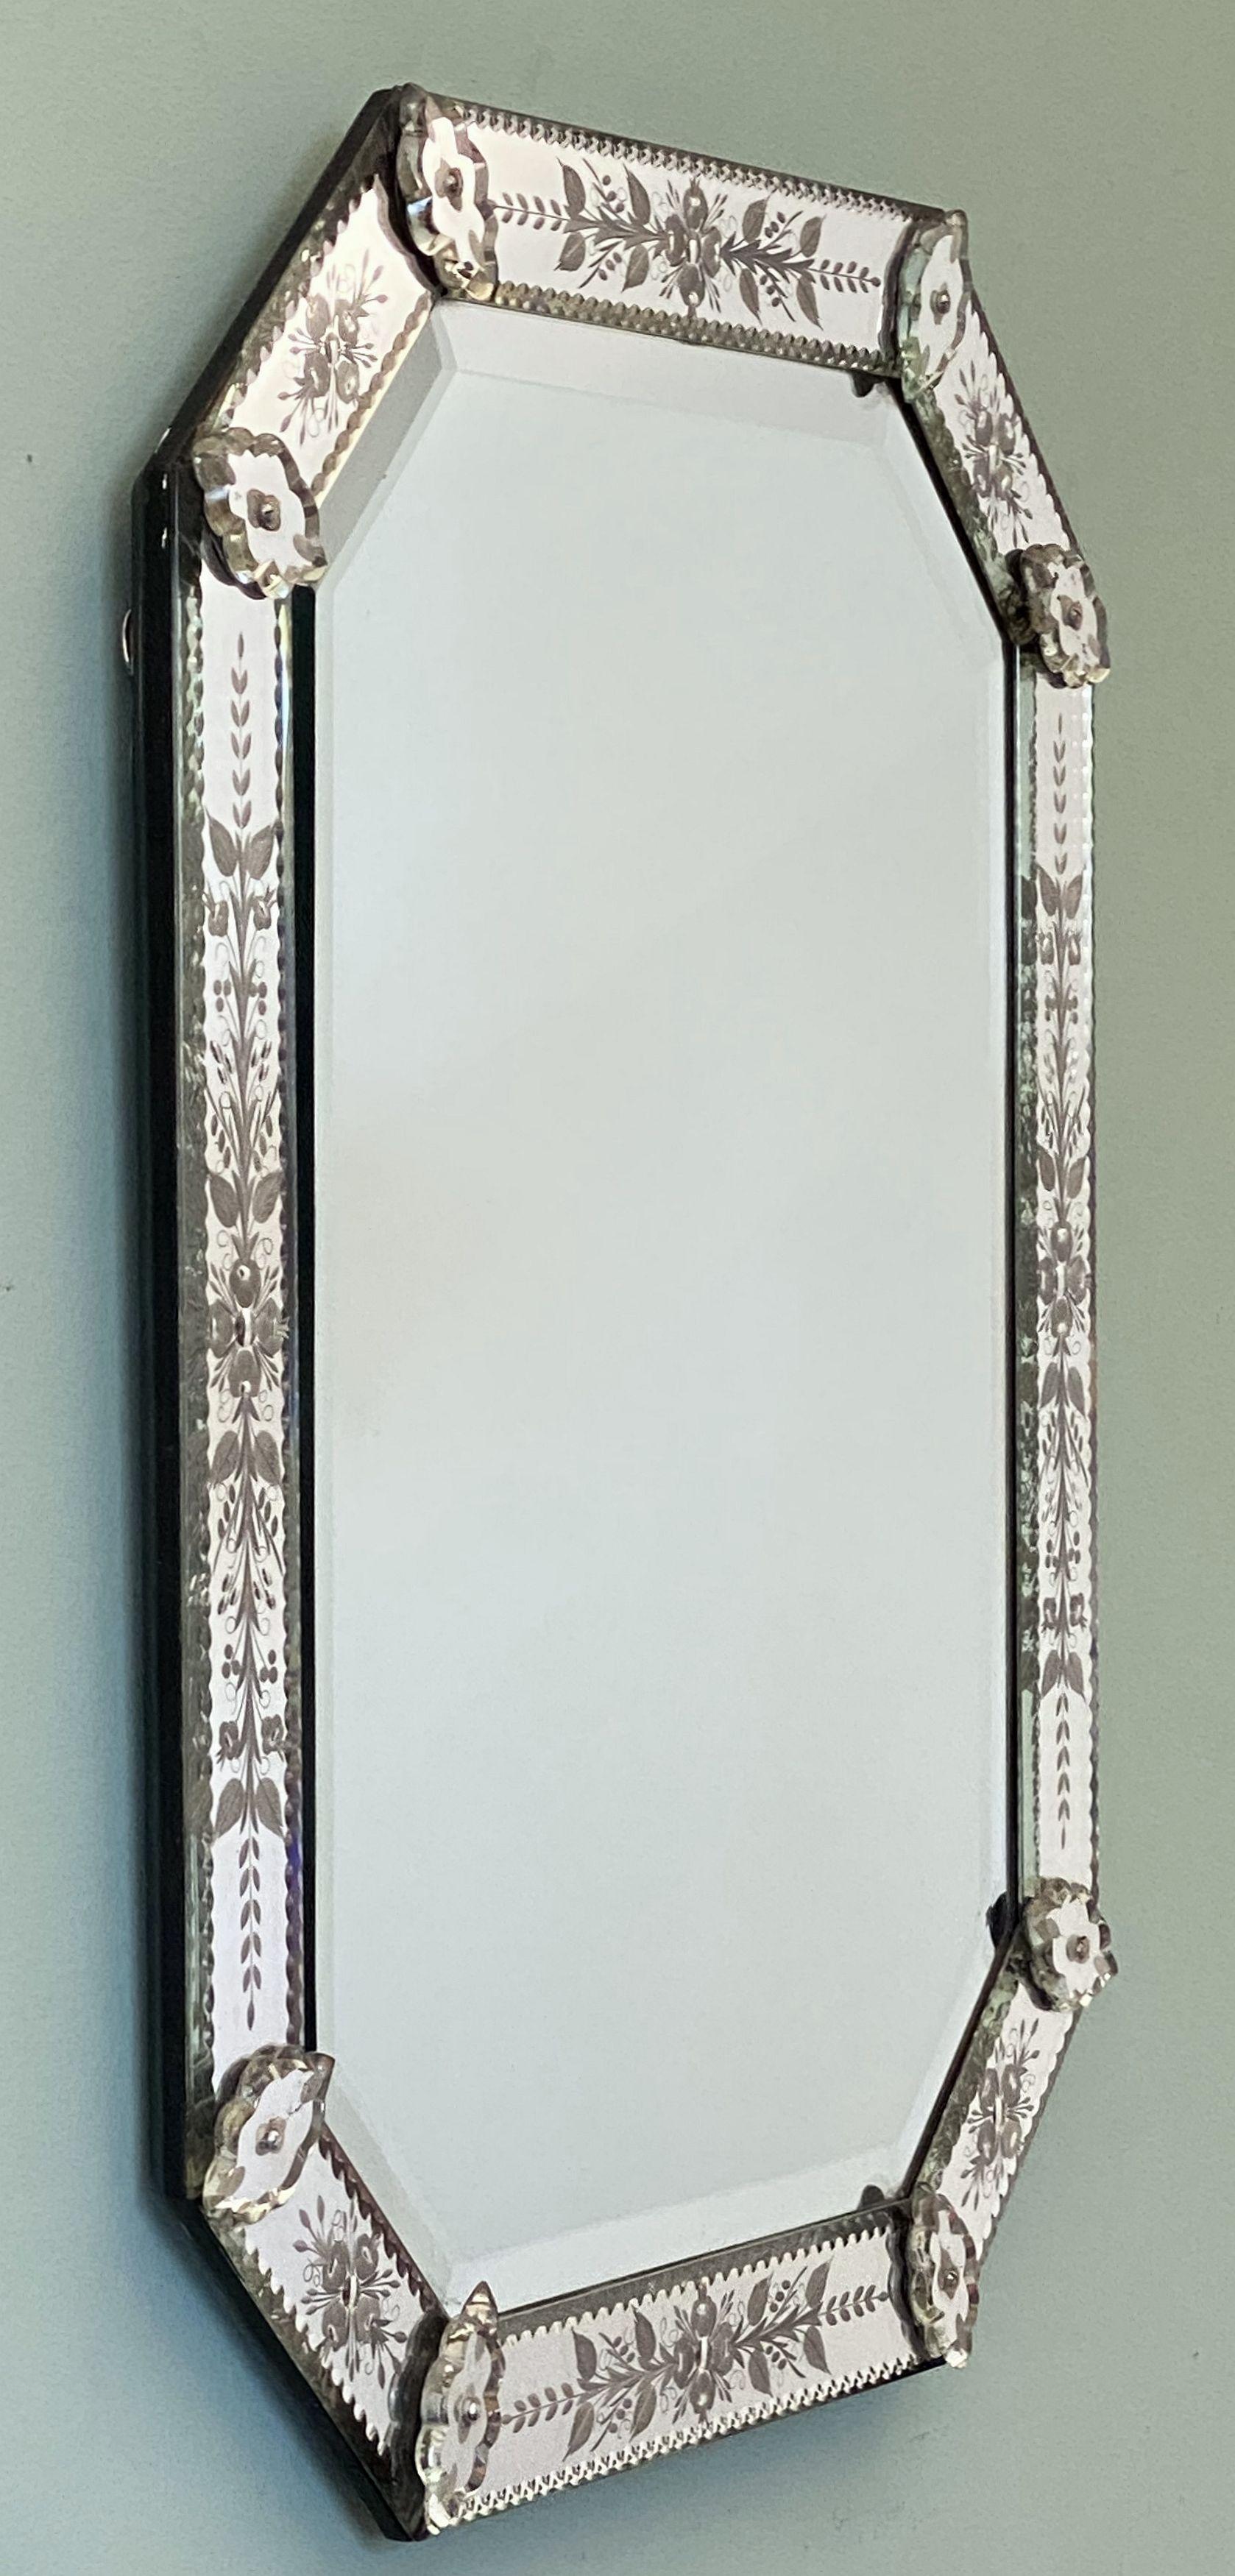 A fine Venetian octagonal wall mirror from Italy, featuring an eight-sided etched mirrored glass frame with an elegant foliate design, with eight decorative mirrored glass cartouches, surrounding a beveled mirror in the center.

Dimensions are H